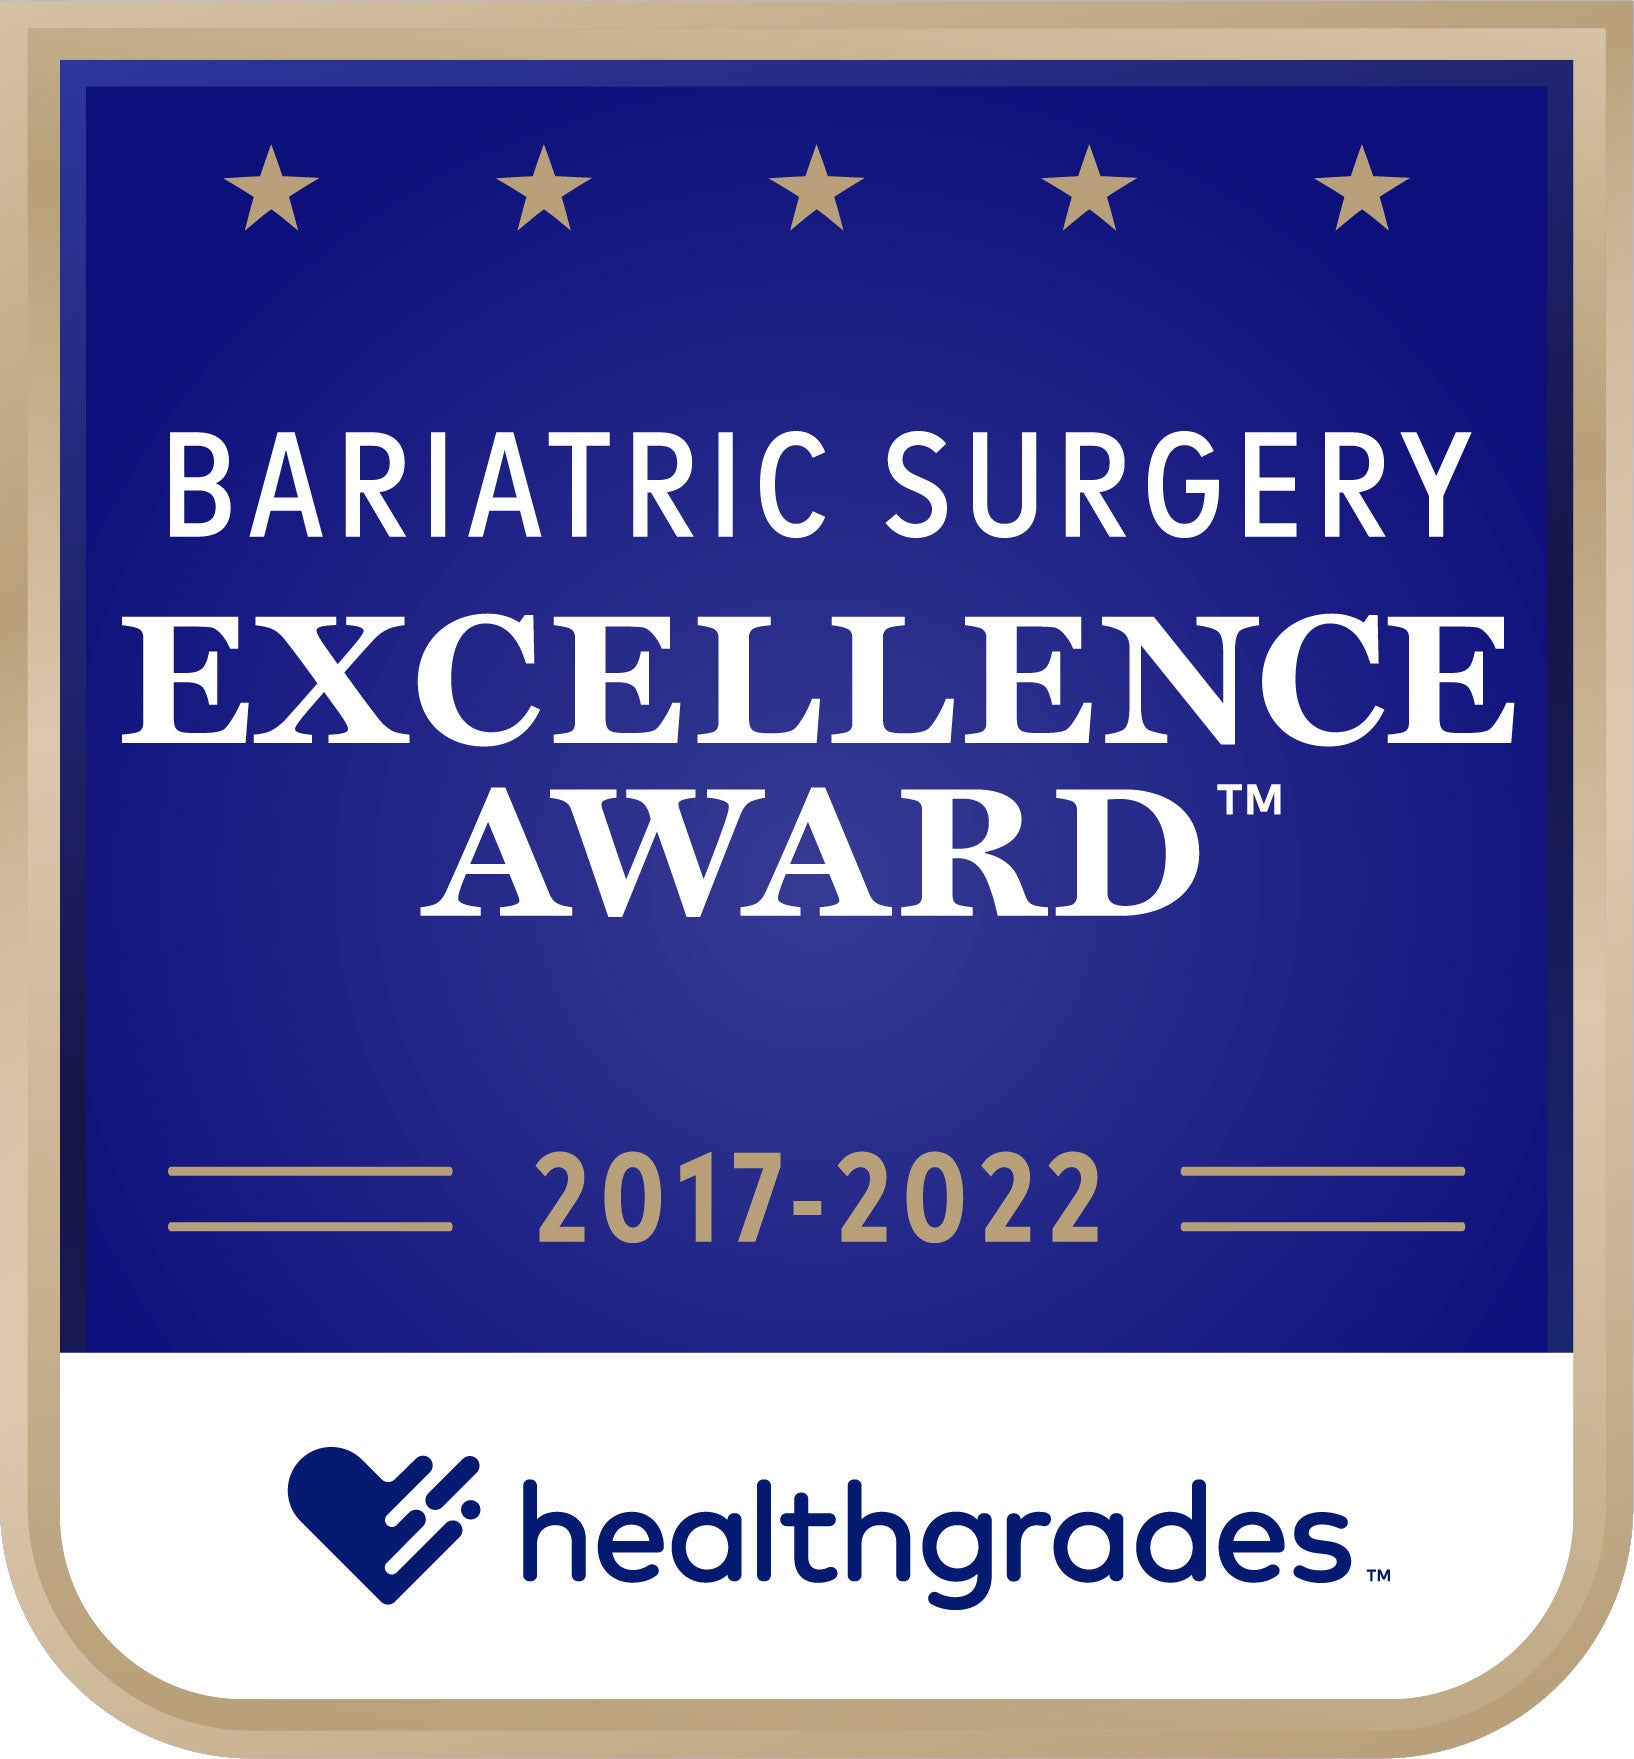 Bariatric Surgery Excellence Award by Healthgrades